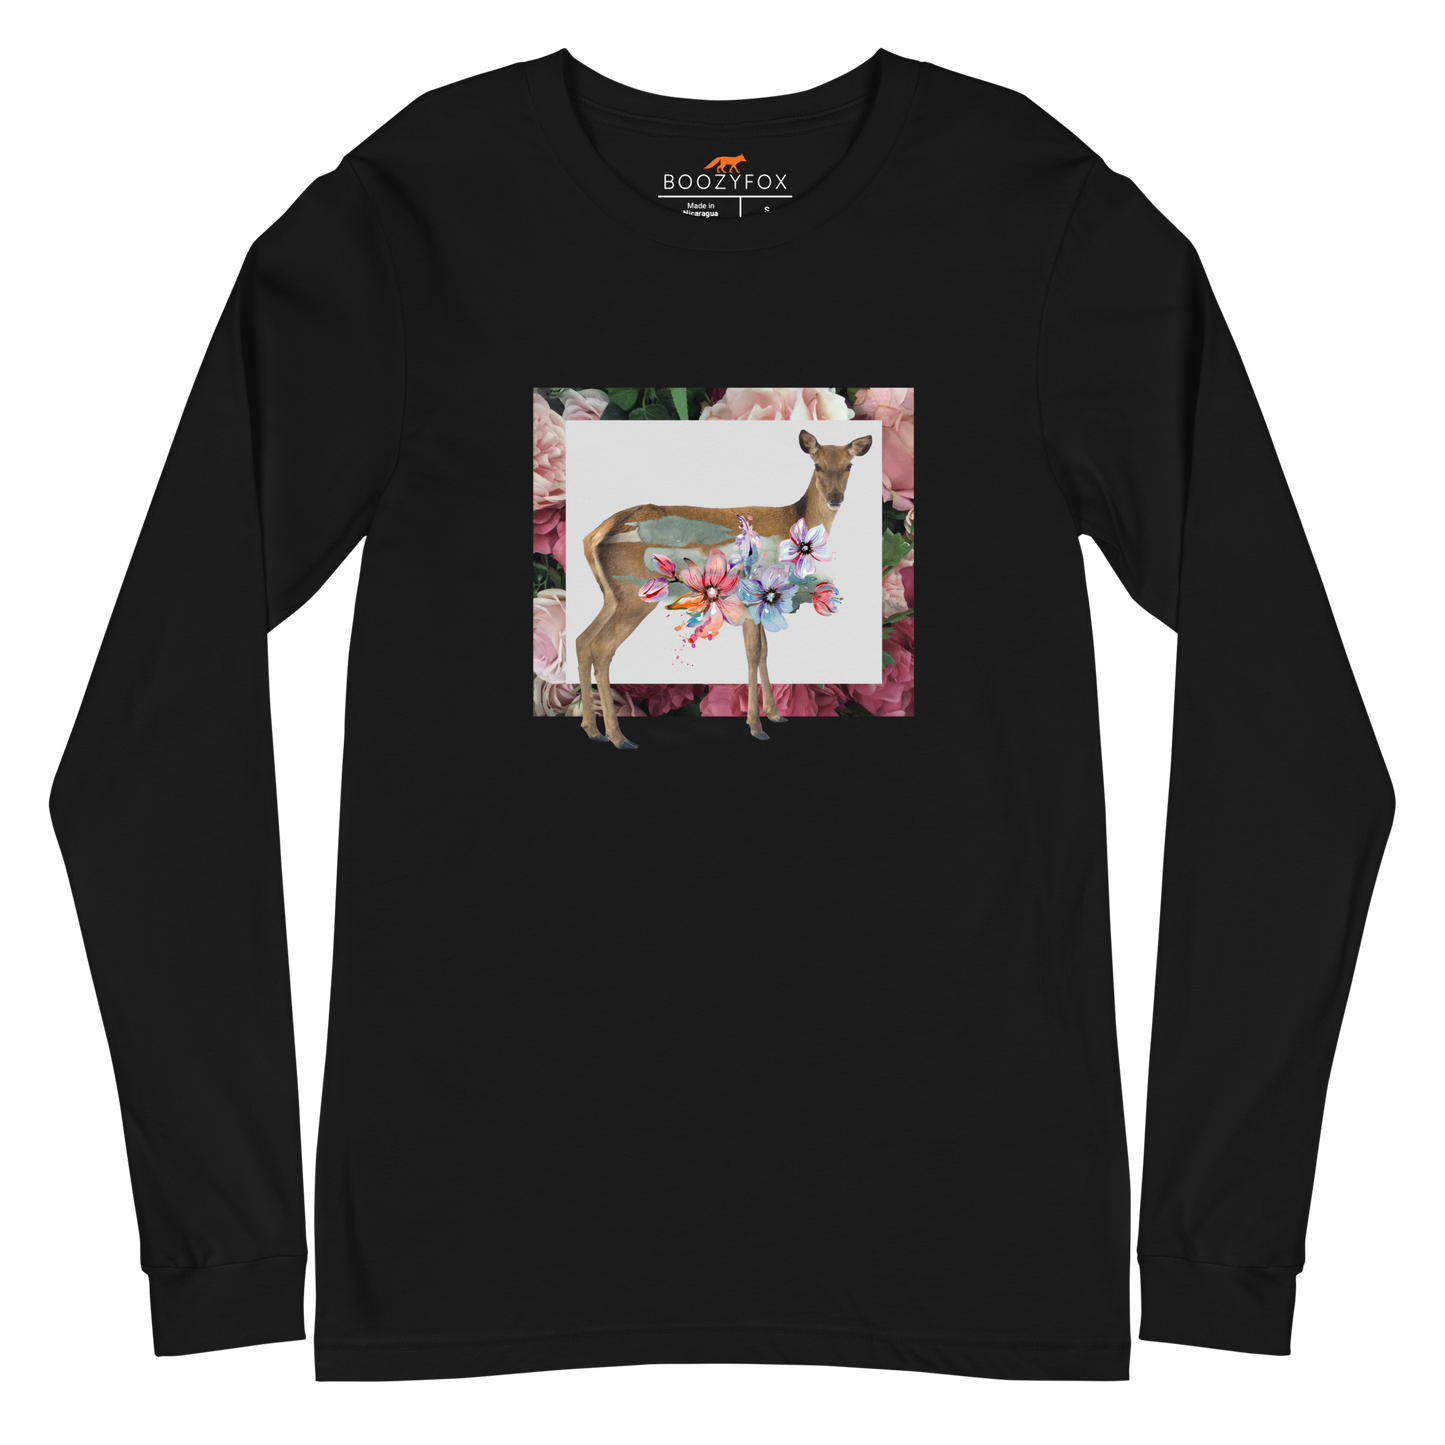 Black Deer Long Sleeve Tee featuring a captivating Floral Deer graphic on the chest - Cute Deer Long Sleeve Graphic Tees - Boozy Fox